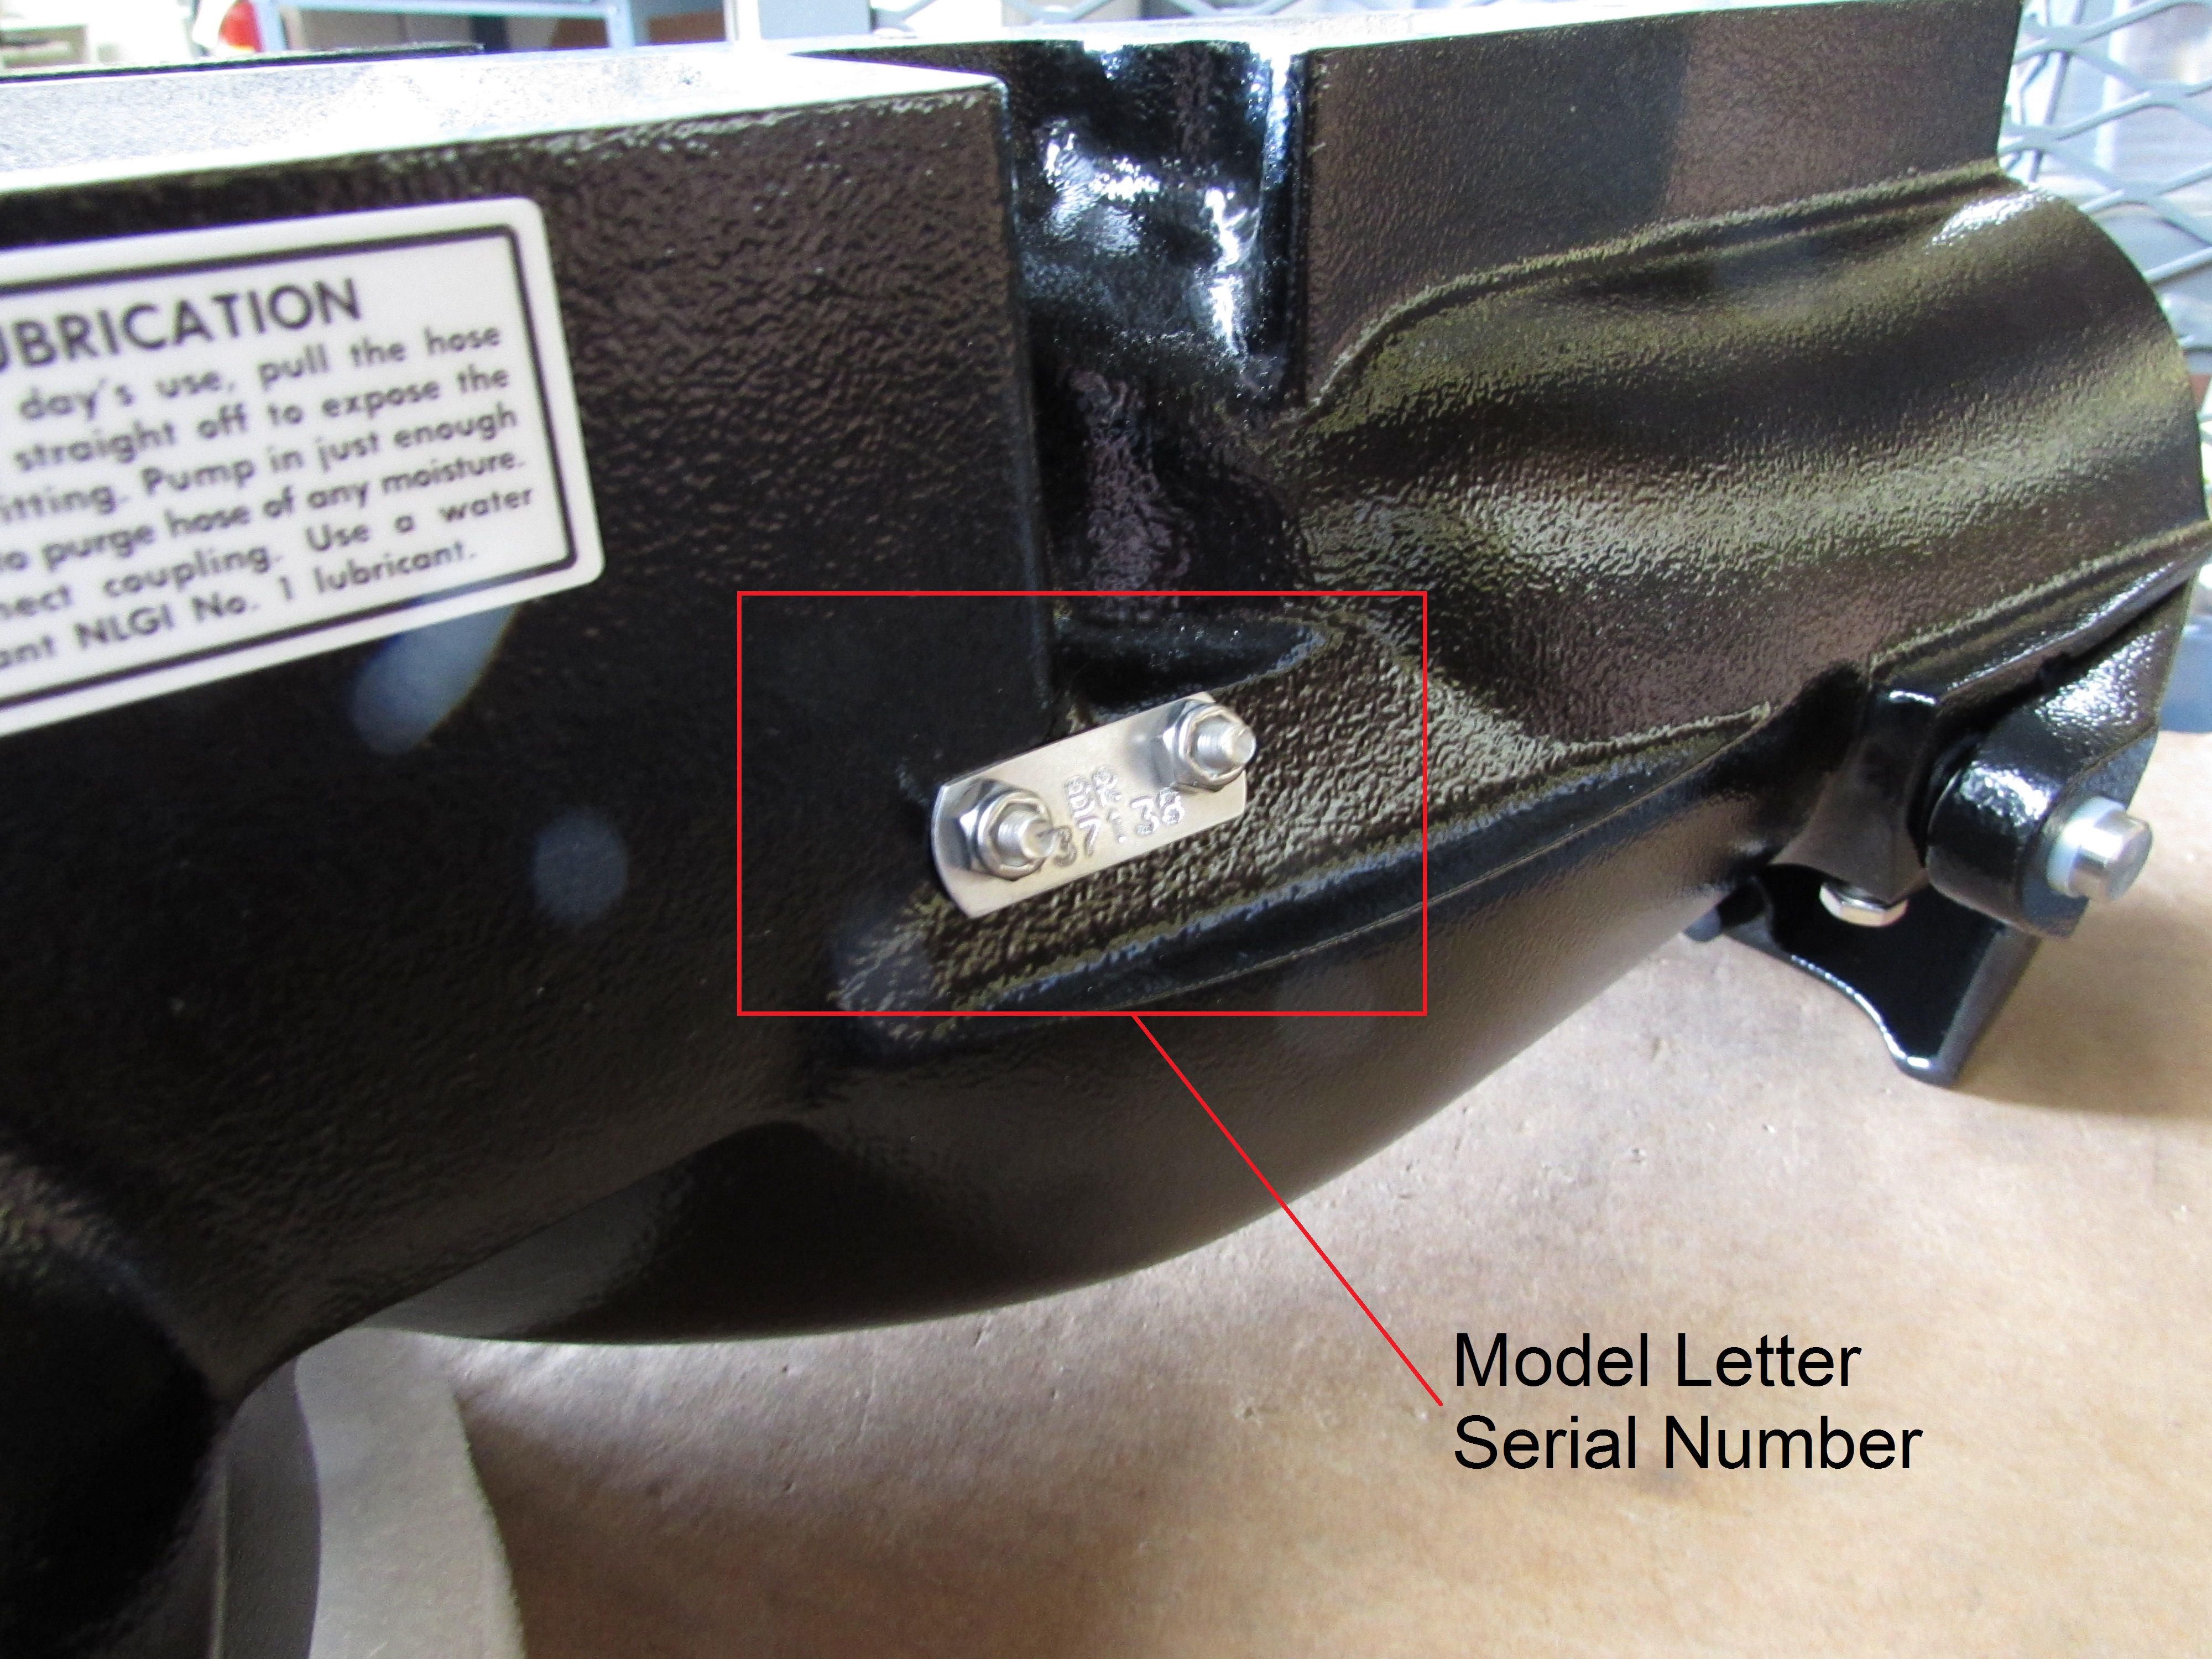 Model Identification and Serial Numbers.